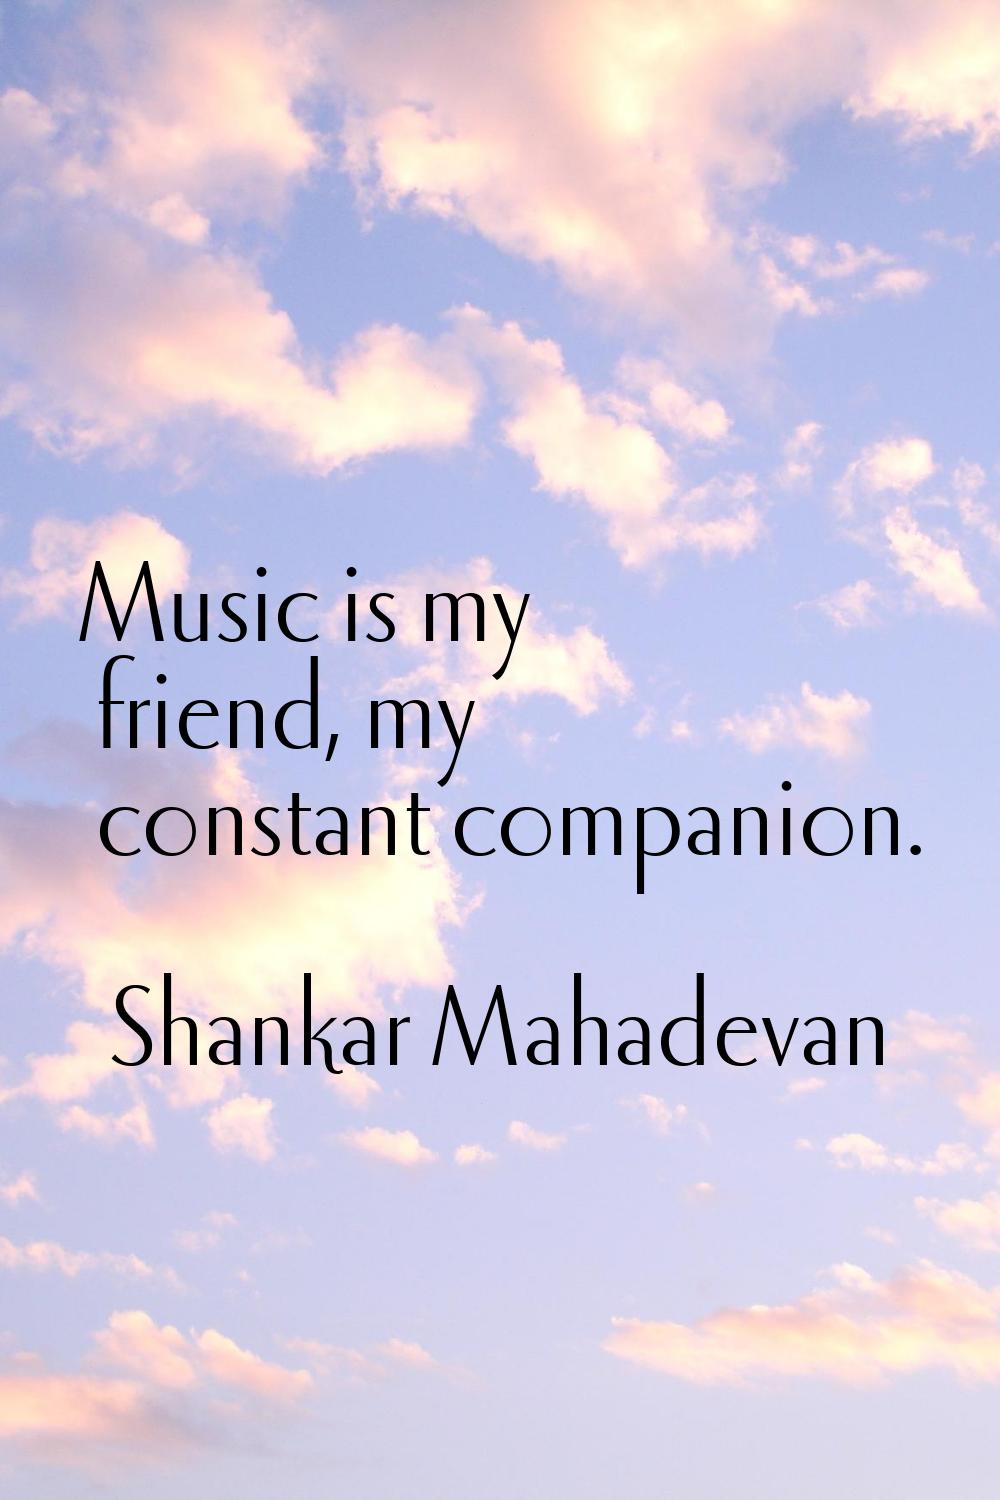 Music is my friend, my constant companion.